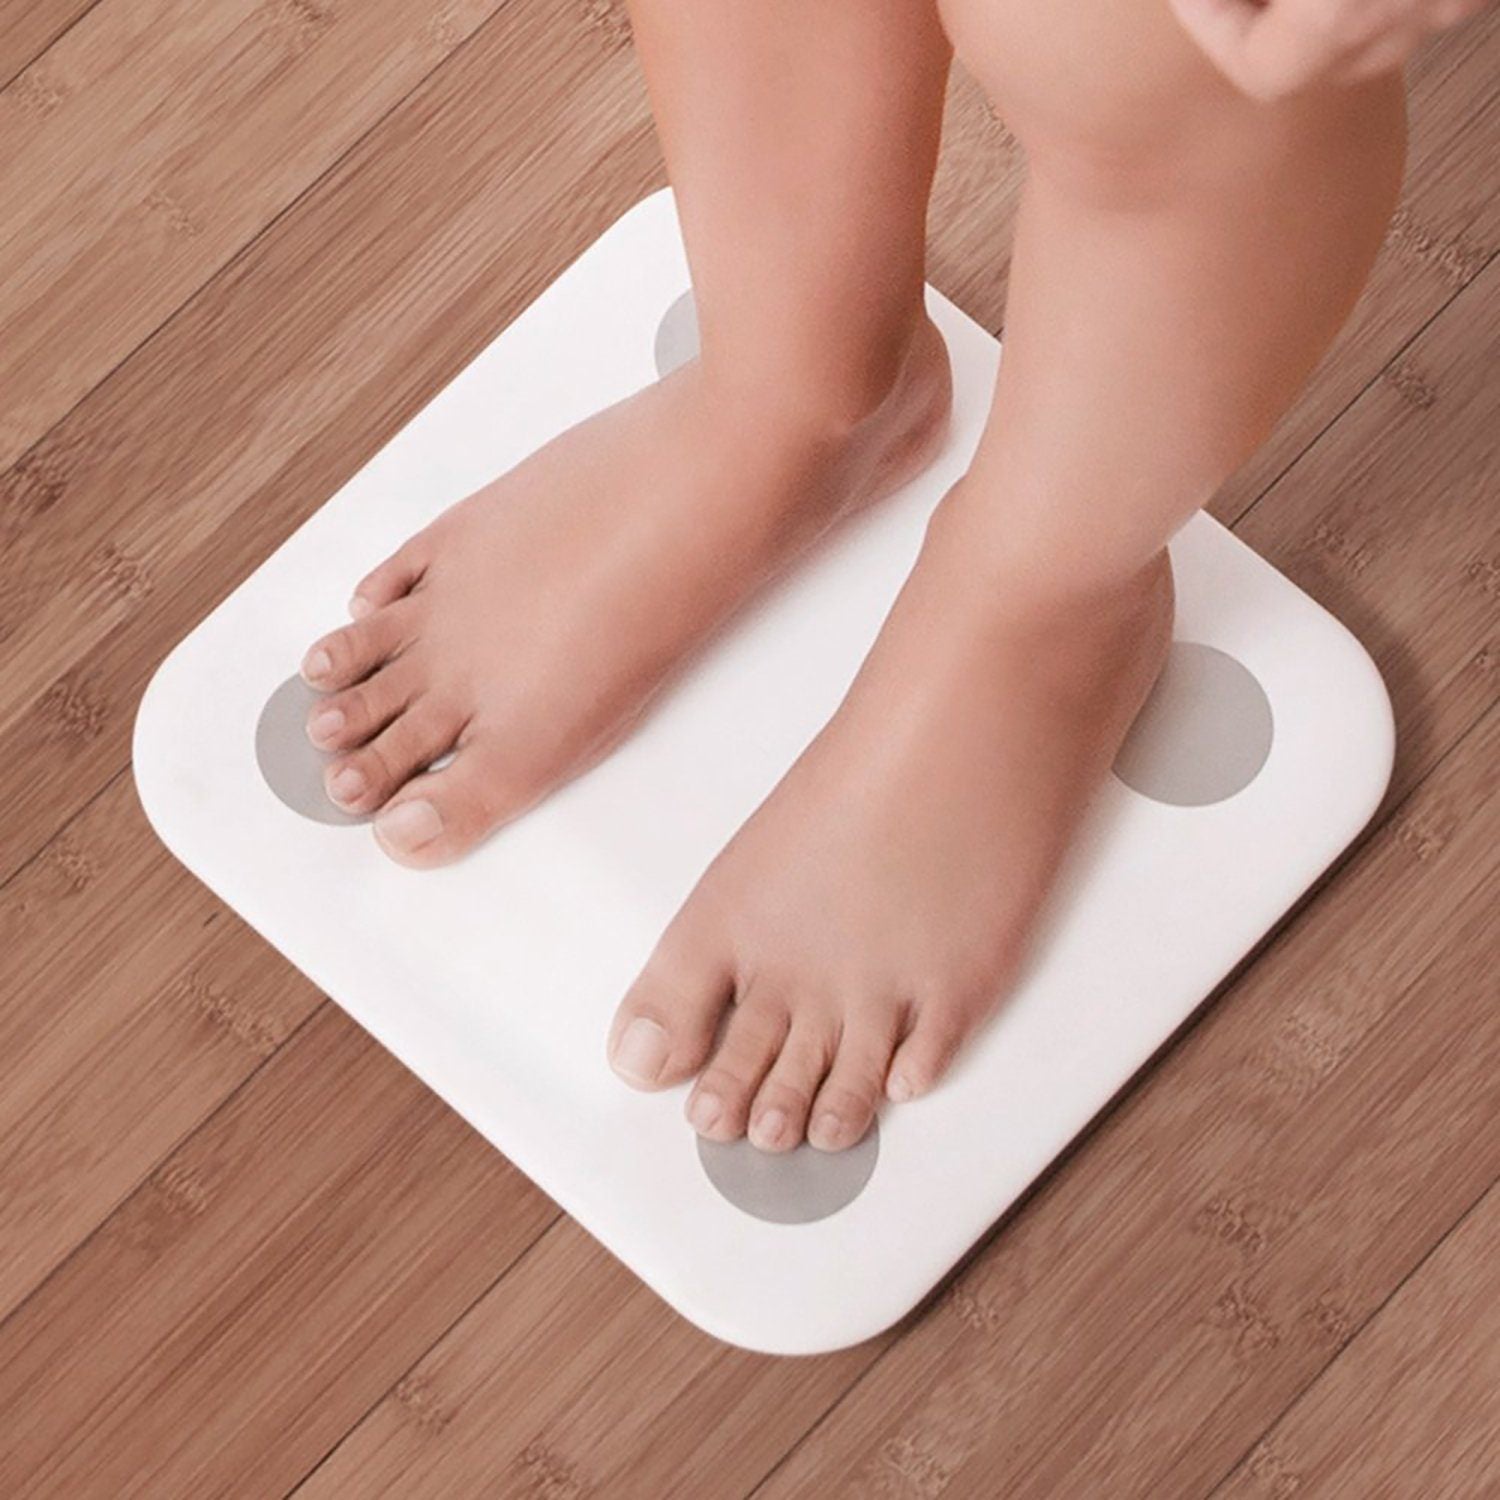 Xiaomi Weighing Body Fat Scale 2 LED Display with Smart Scale Bluetooth APP Record Track Progress, White Default Xiaomi 